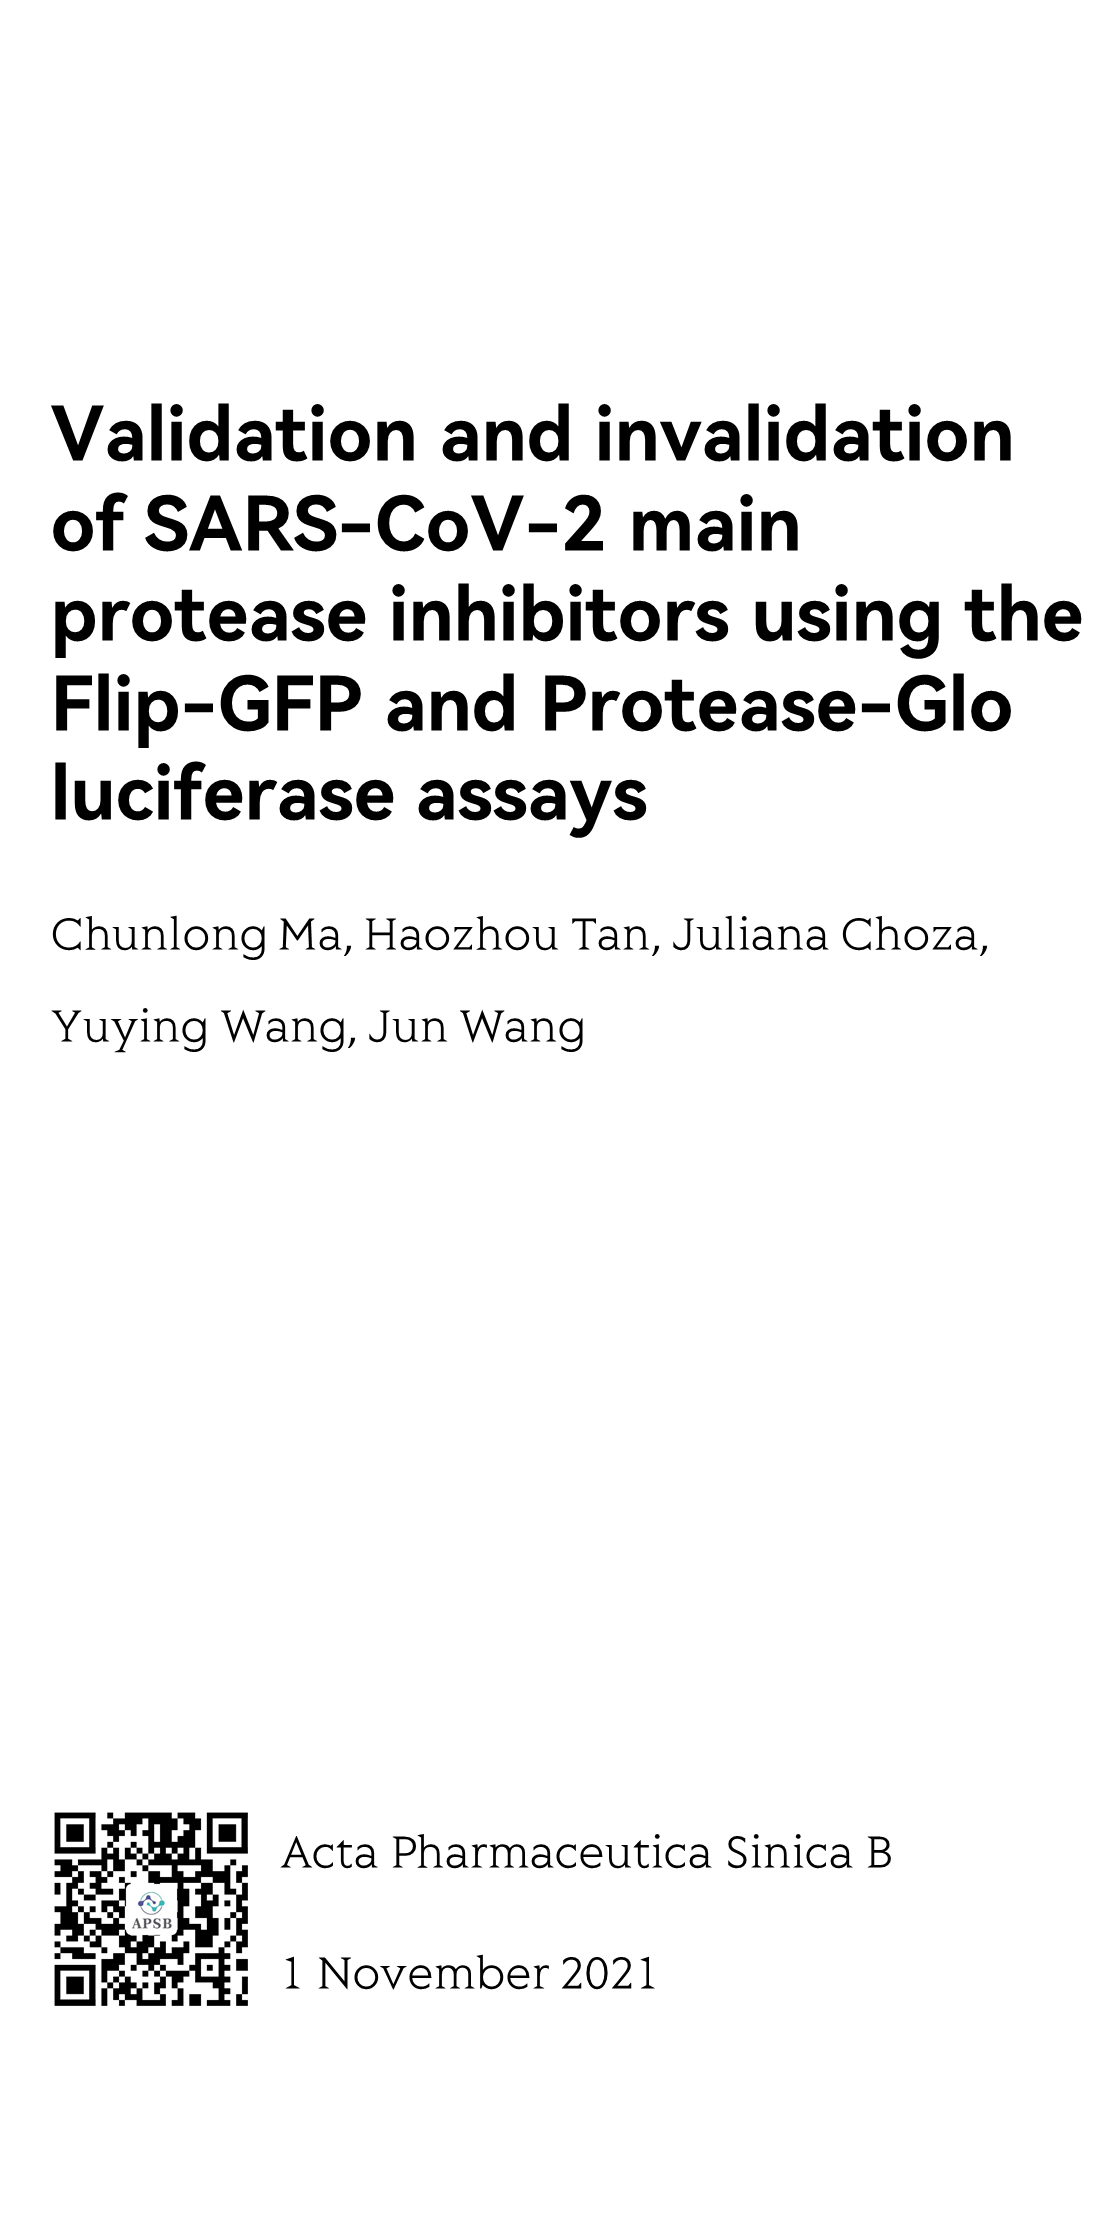 Validation and invalidation of SARS-CoV-2 main protease inhibitors using the Flip-GFP and Protease-Glo luciferase assays_1